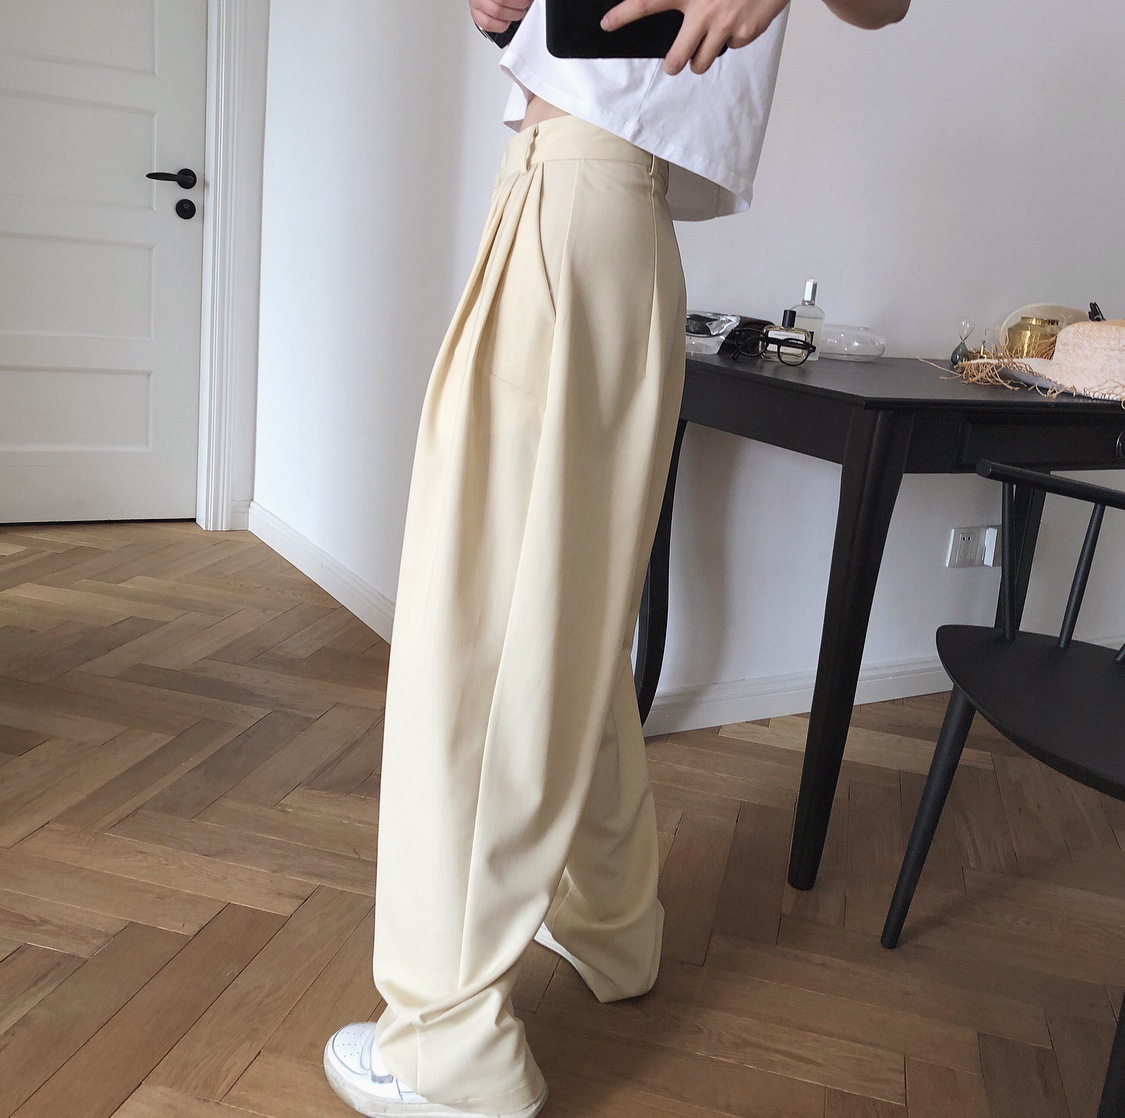 Summer new European and American hipster high waist wide pants loose vertical slim straight radish pants casual trousers women thin